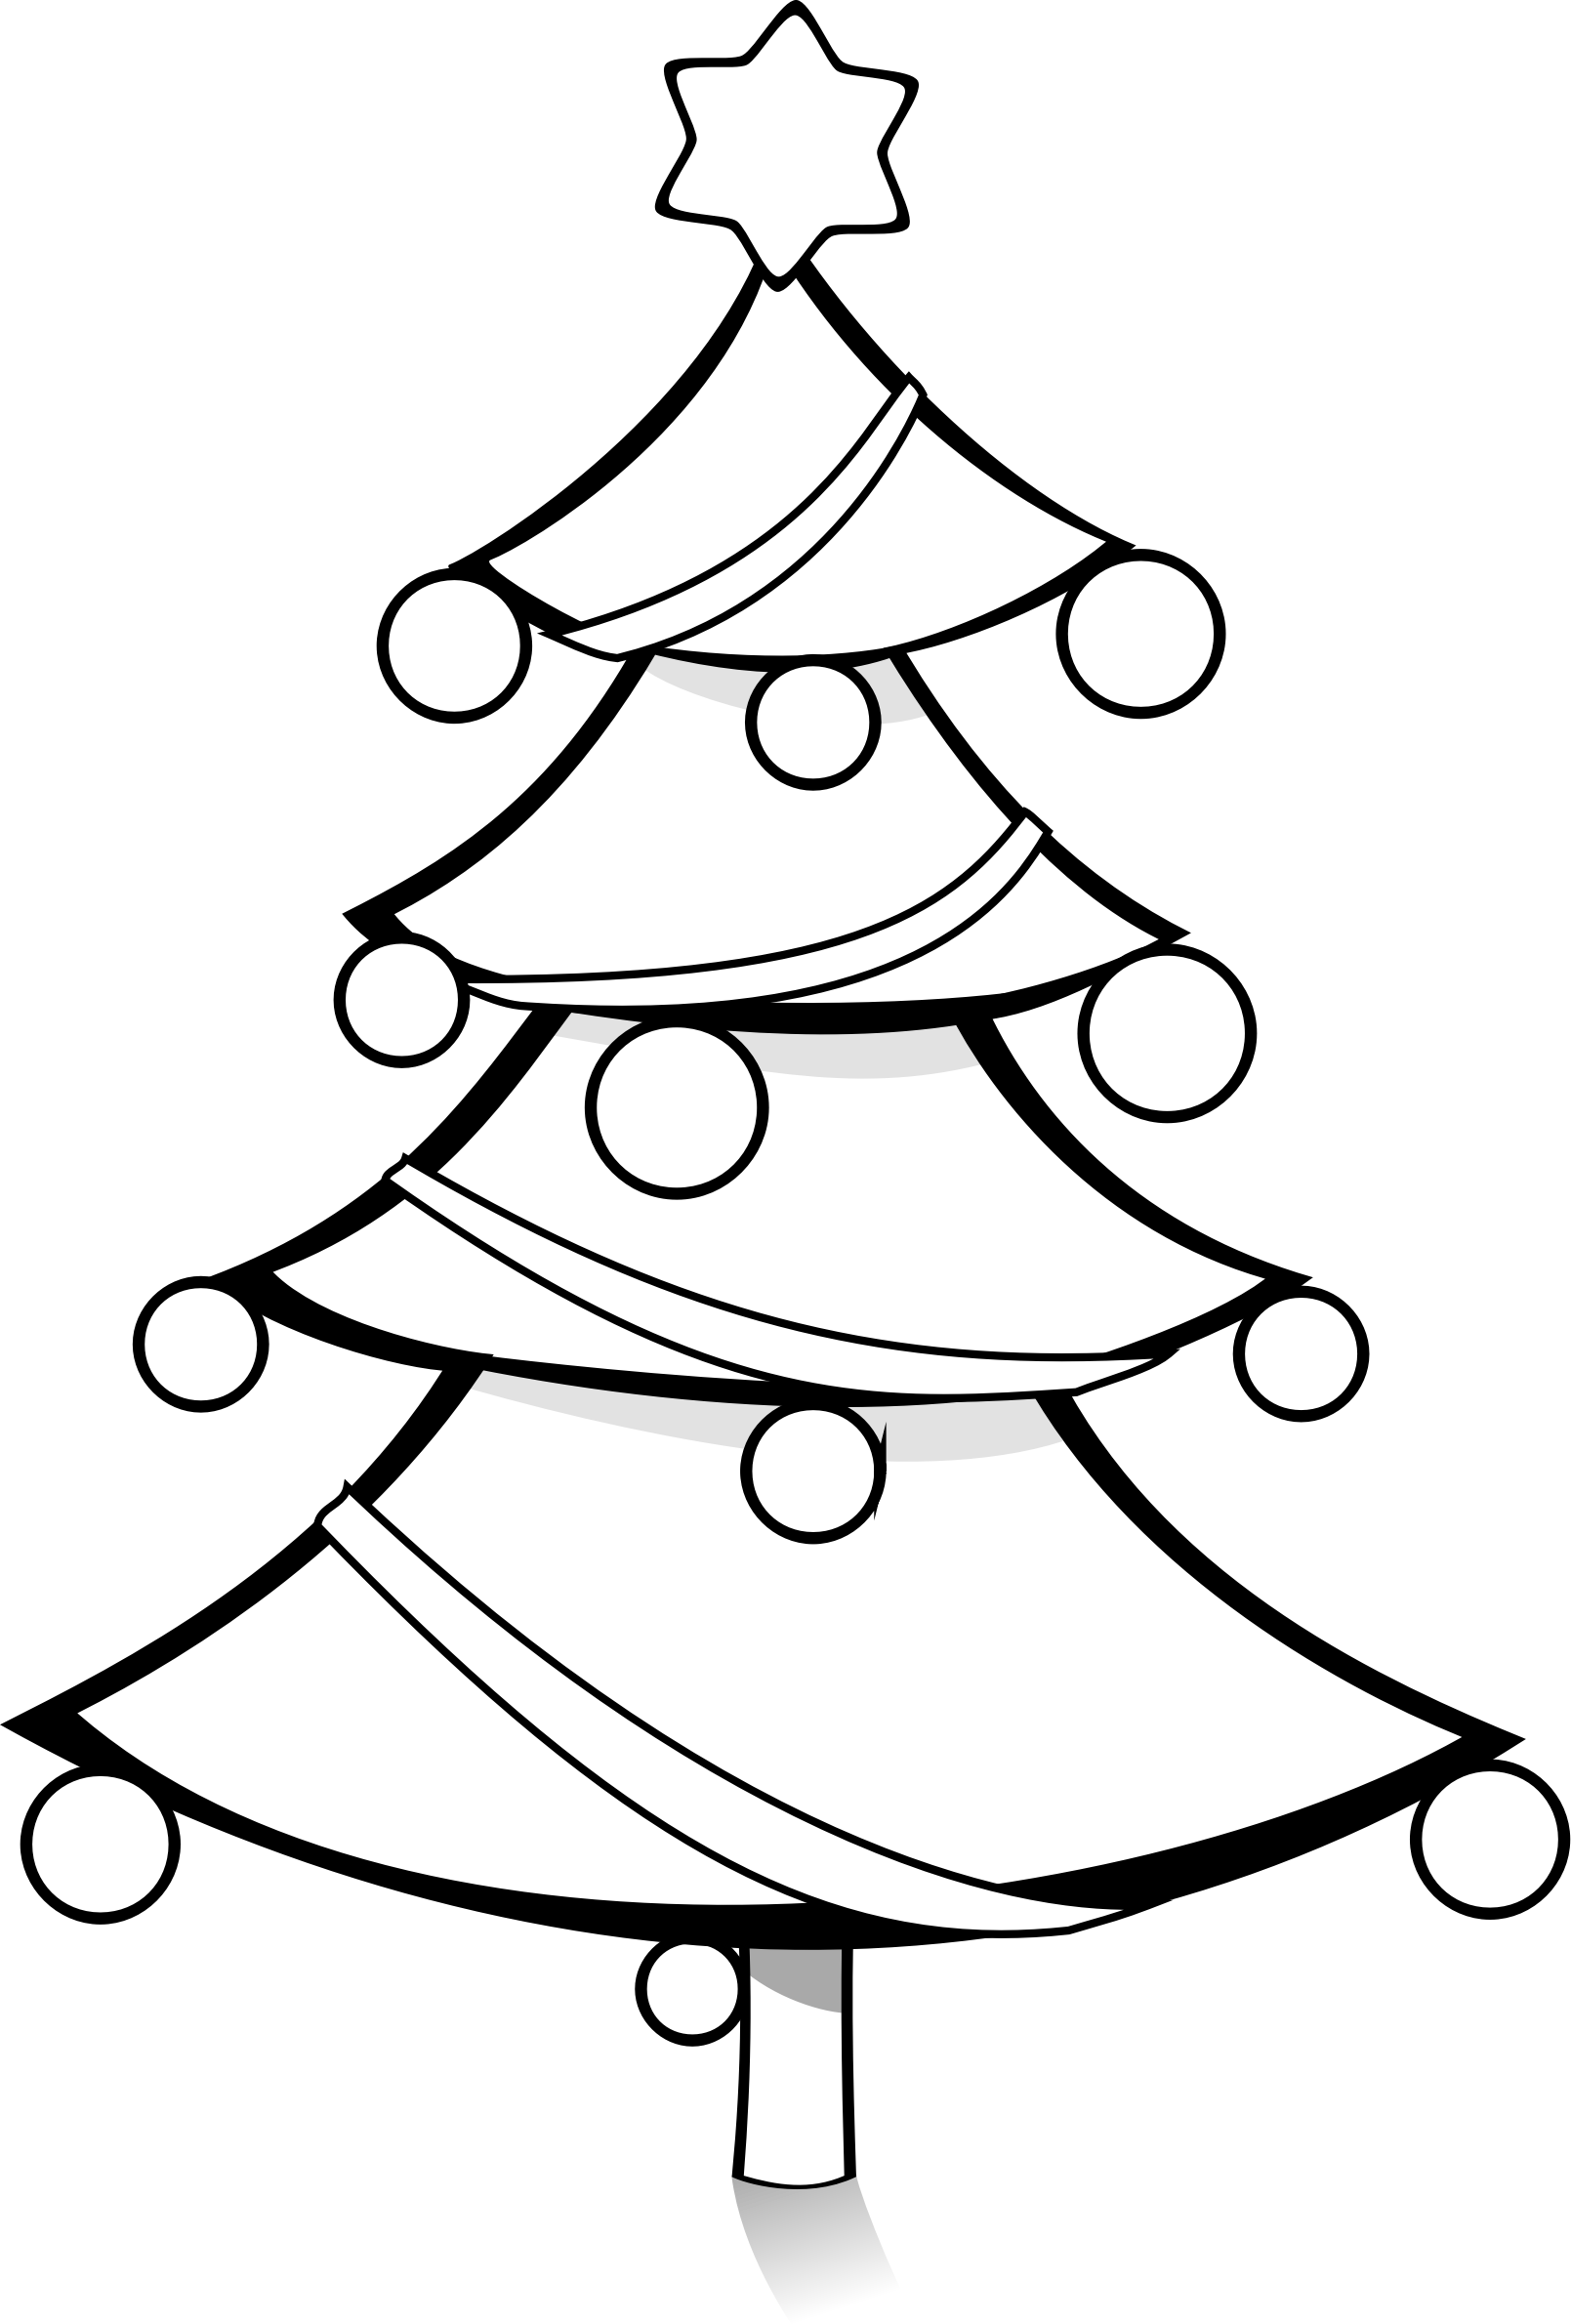 View 6 Clipart Black And White Christmas Tree - casequotehaven